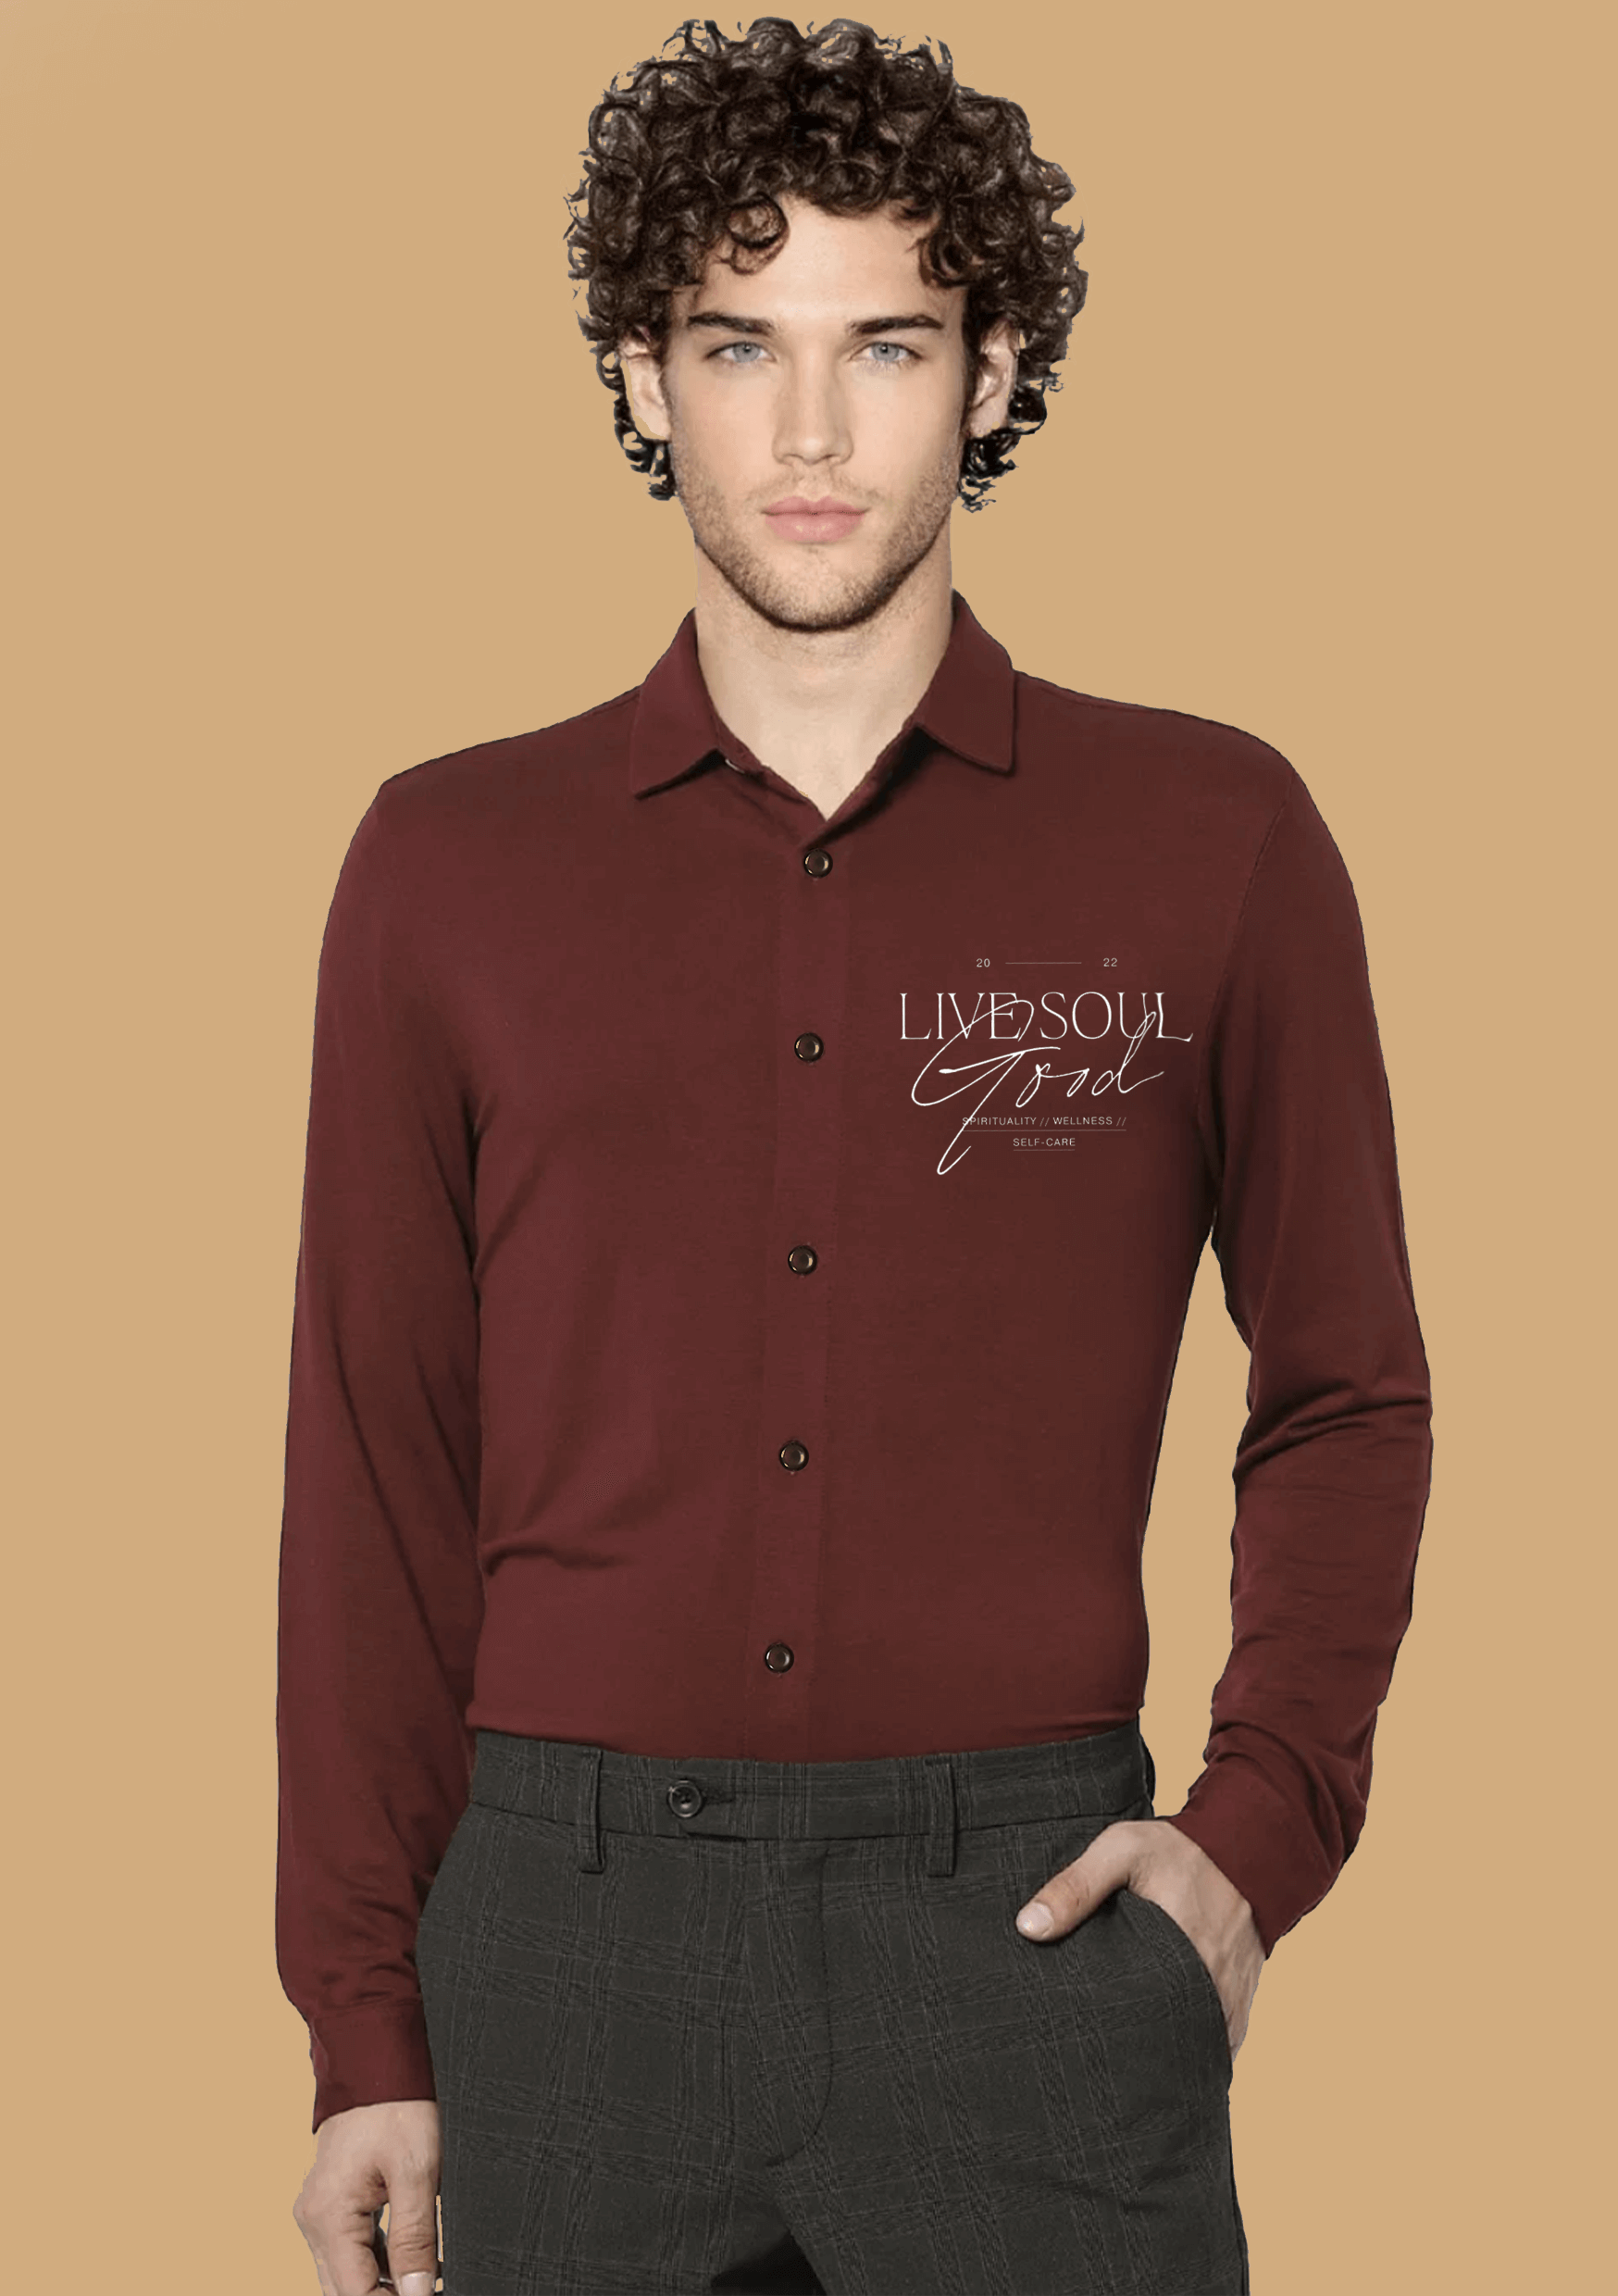 Live Soul Good Printed Maroon ClubWear Shirt By Offmint